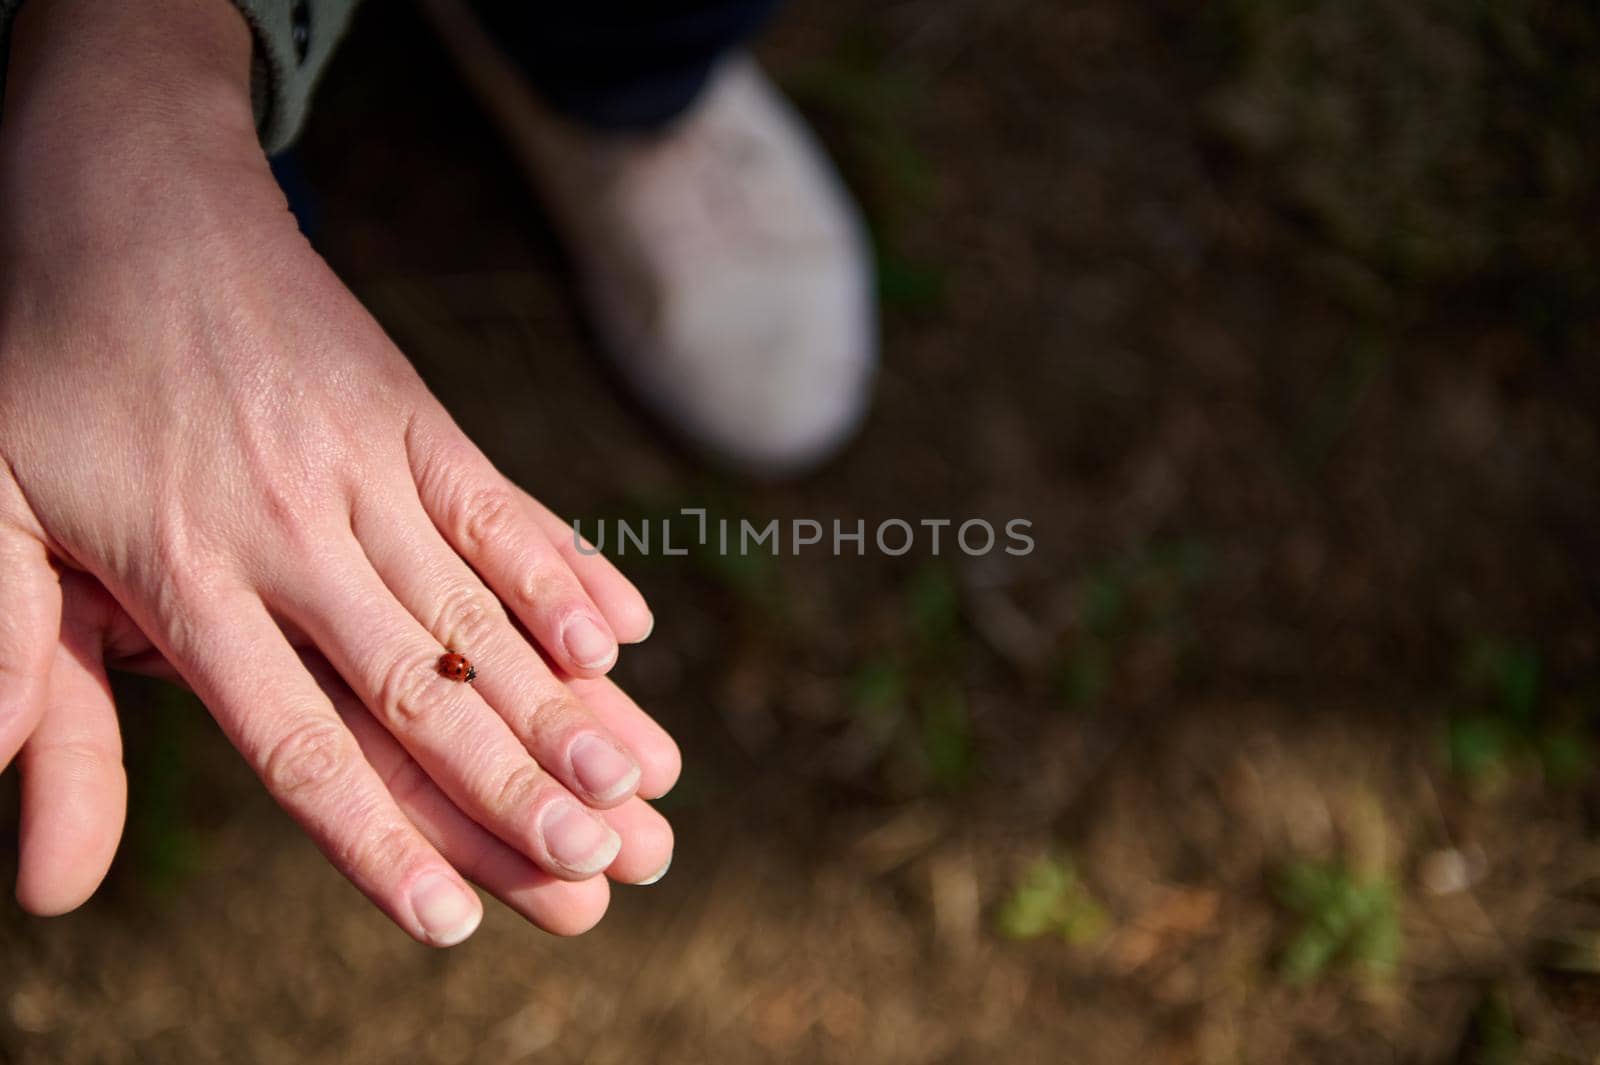 Little beetle ladybug walking on human hand in an early spring sunny day by artgf